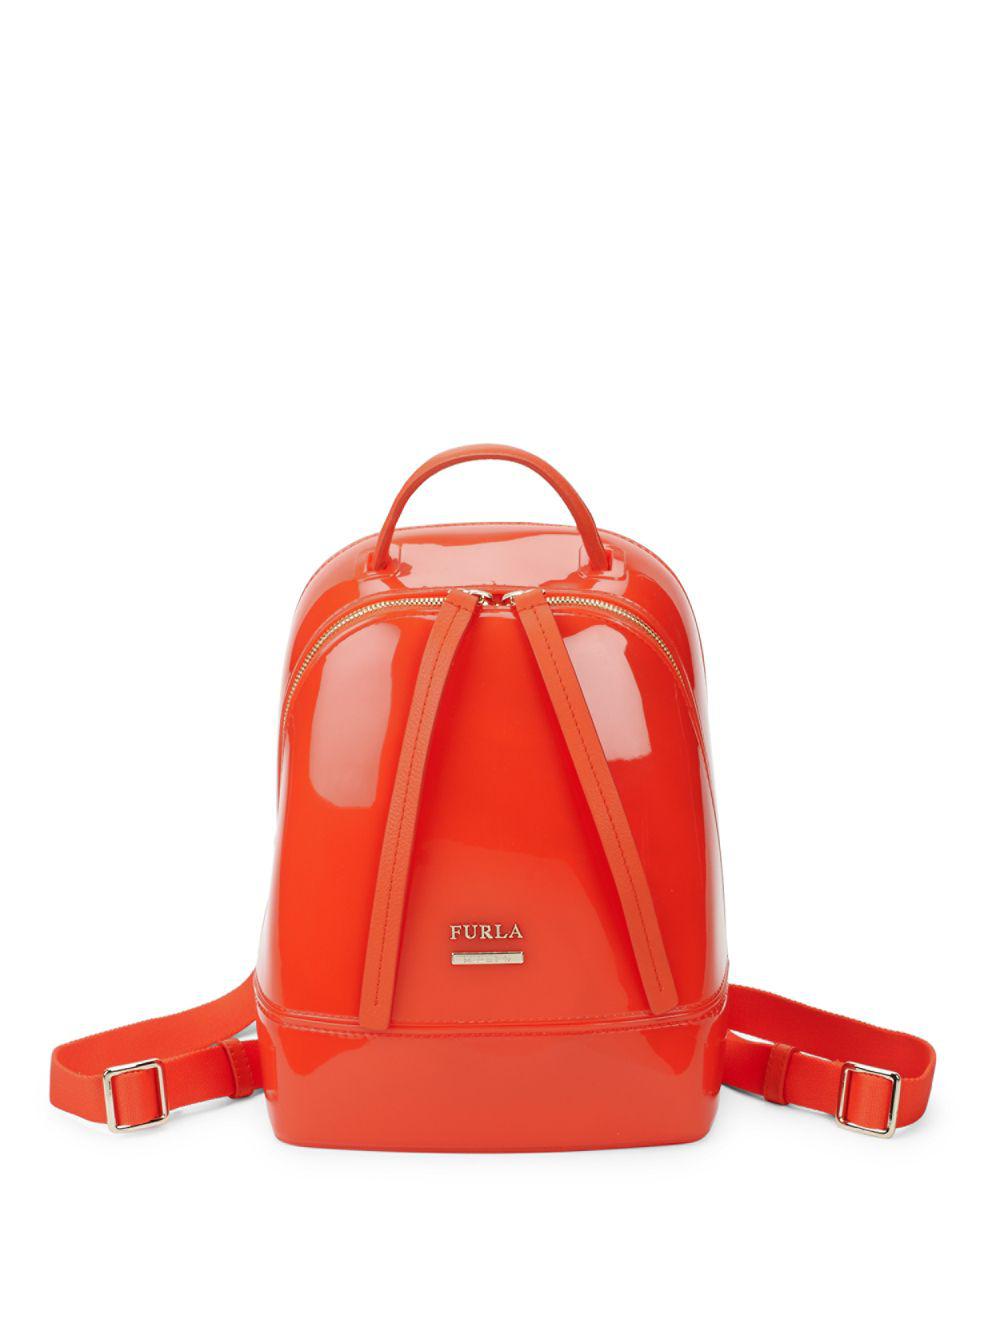 Furla Synthetic Candy Mini Backpack in Orange - Lyst